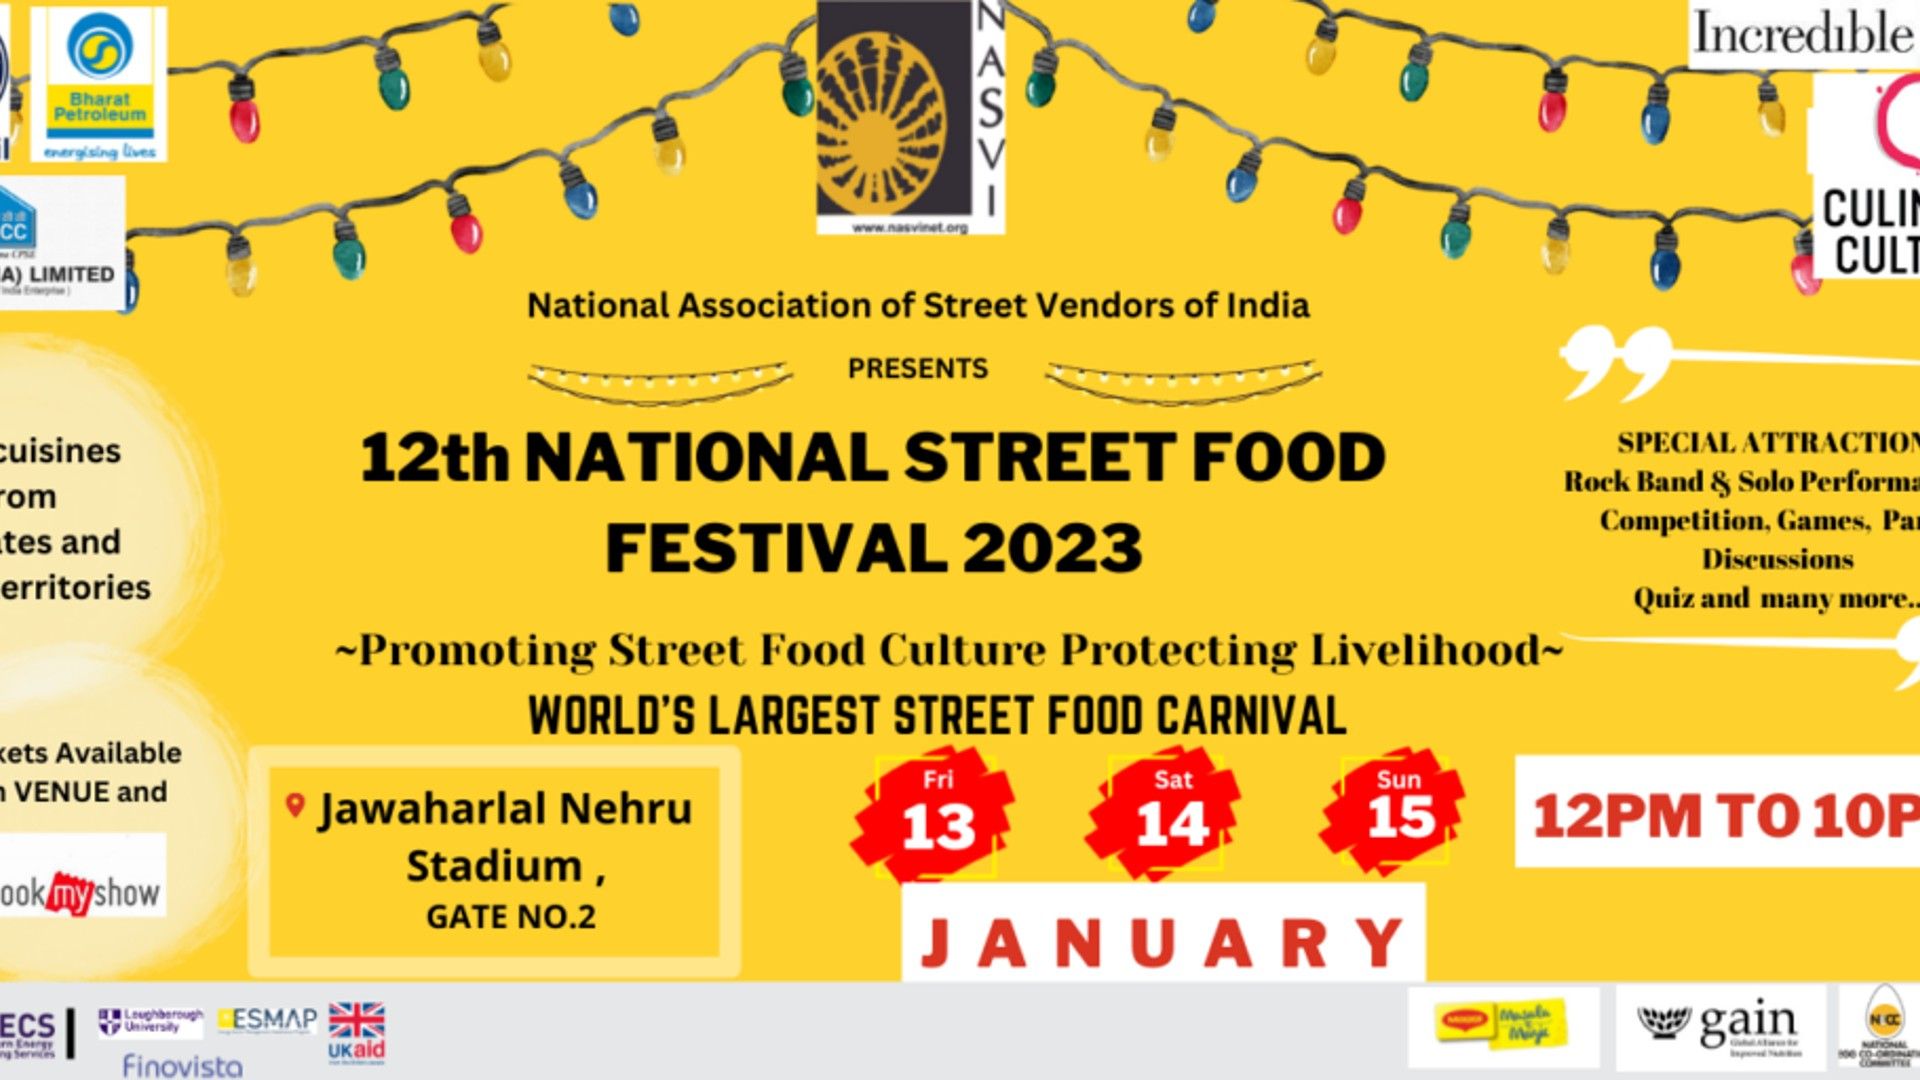 National Street Food Festival 2023: Date, Venue, Timings And More